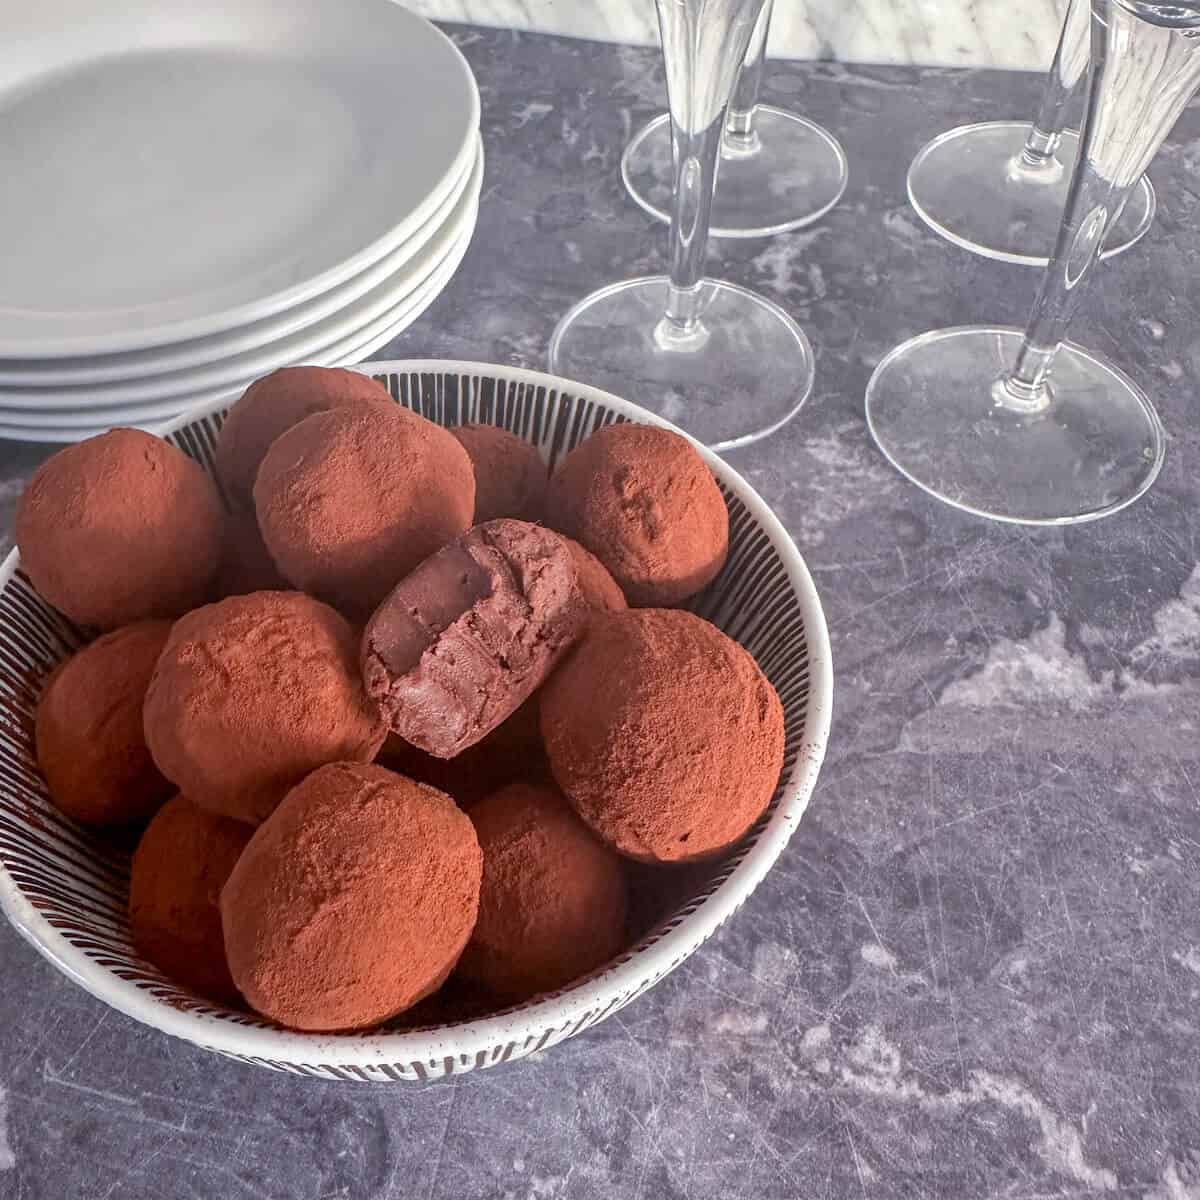 Dark chocolate boozy truffles in a bowl next to plates and wine glasses. 